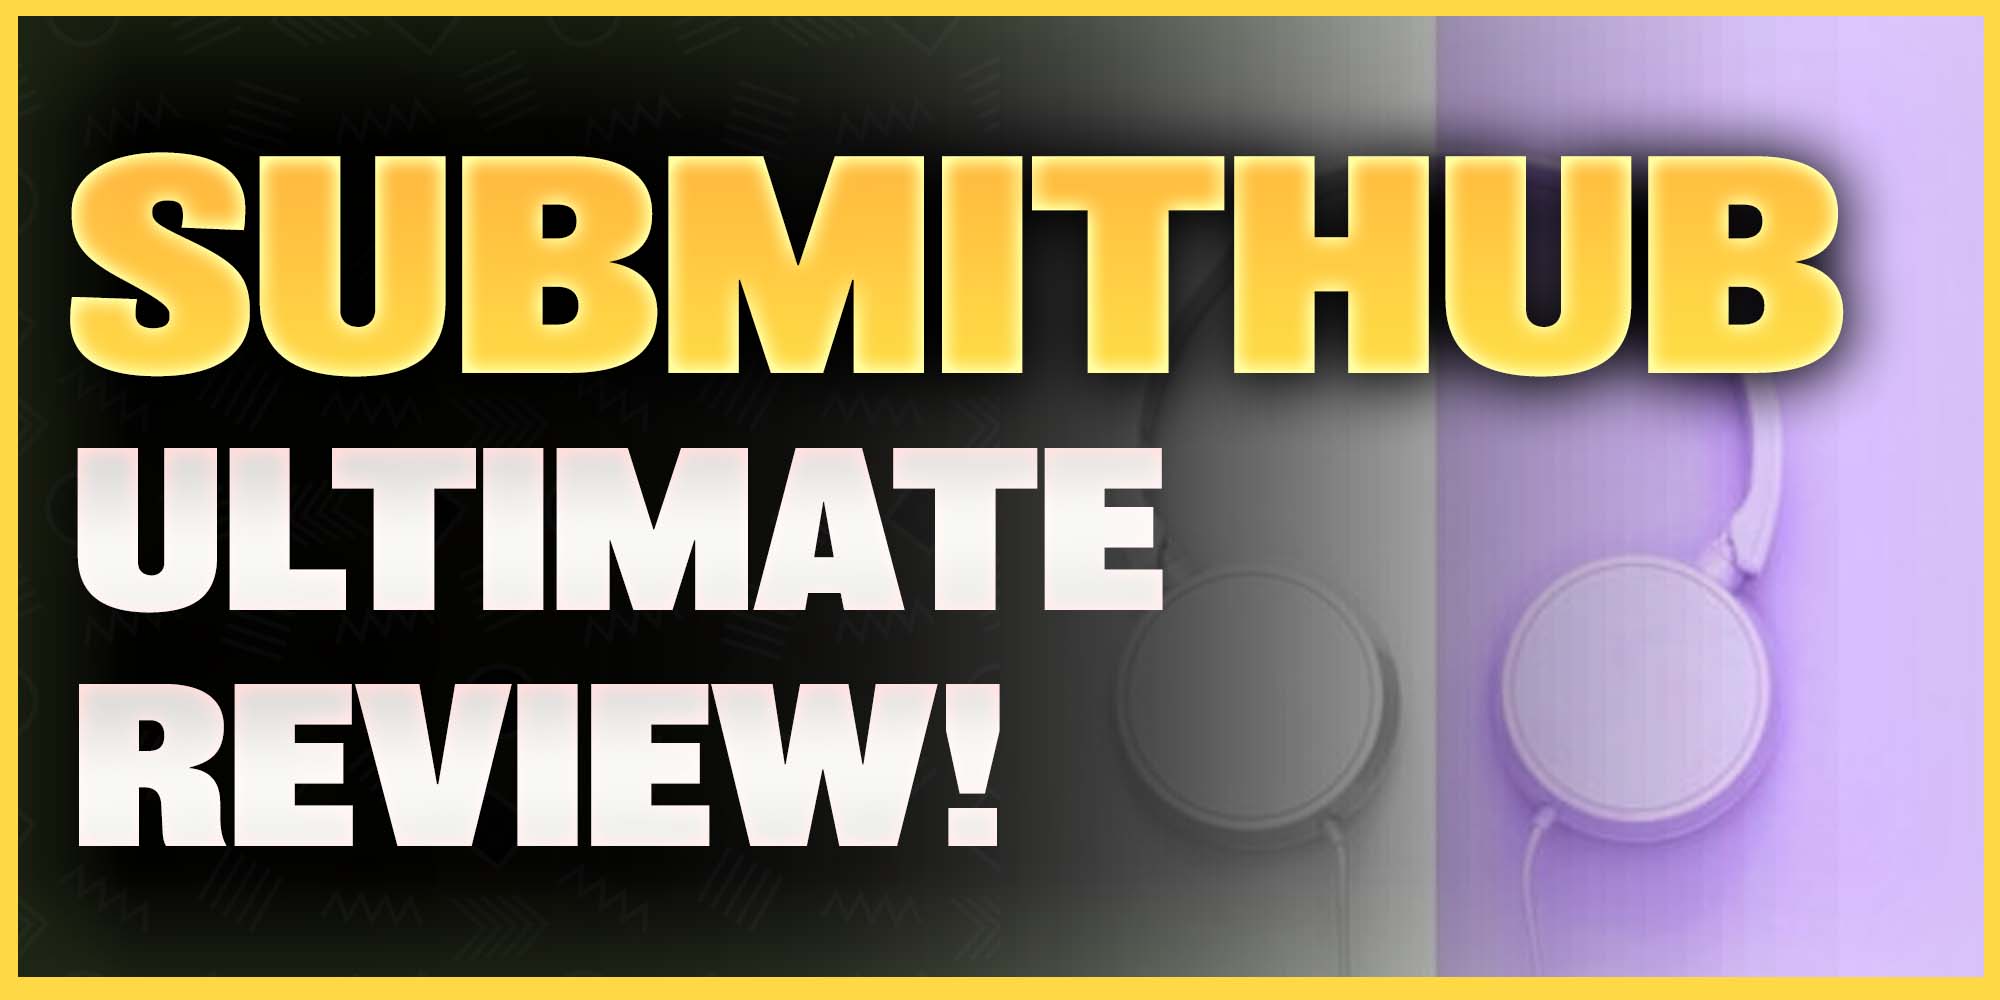 The Ultimate SubmiitHub Review